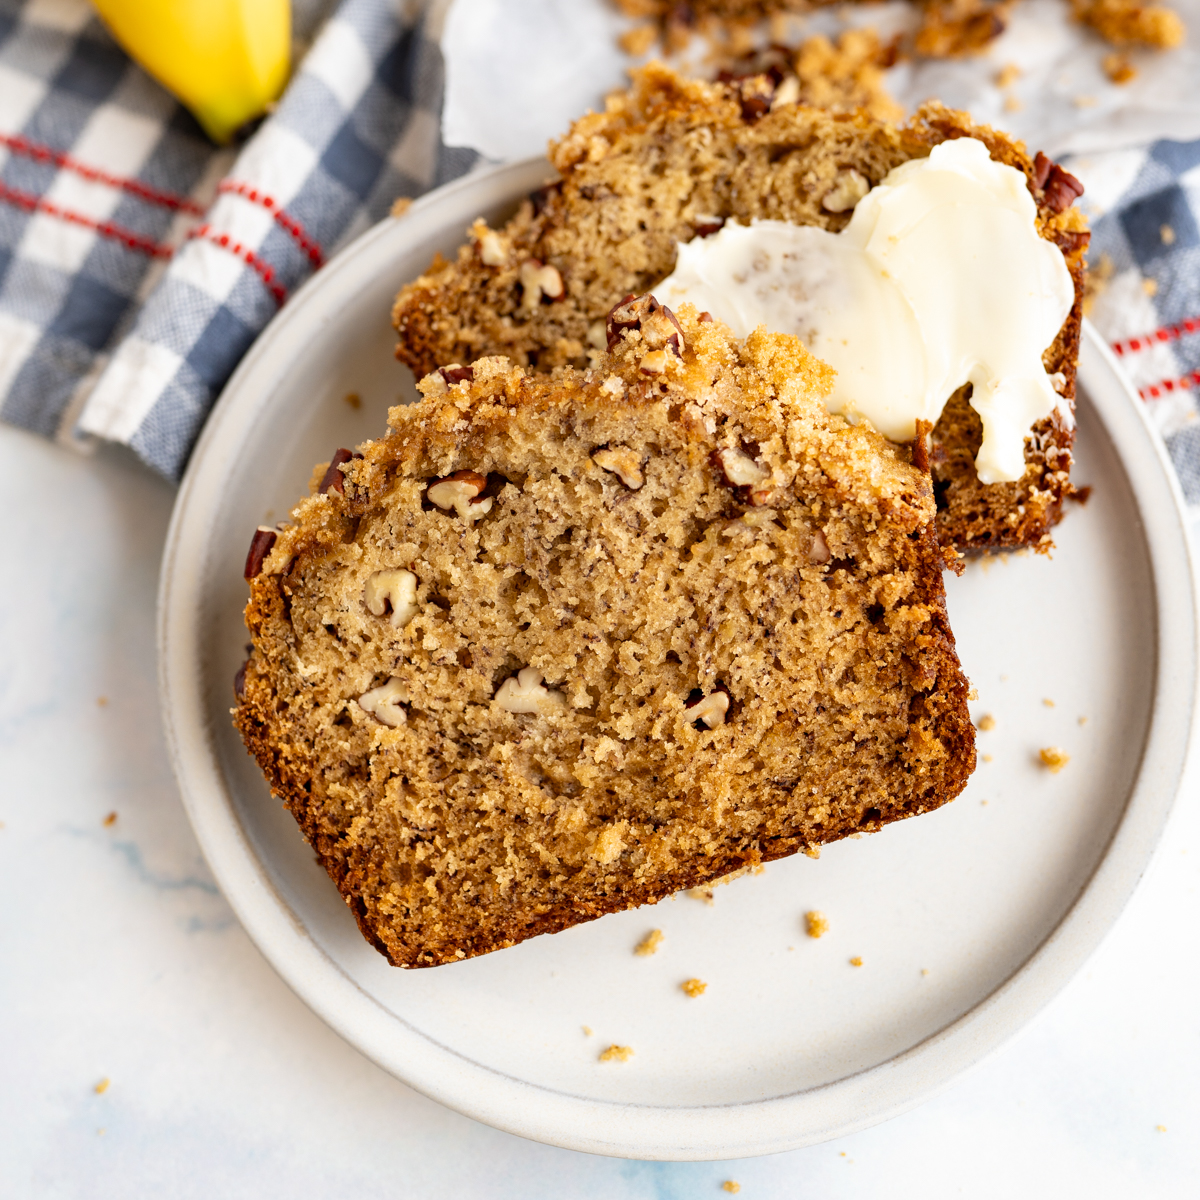 Two slices of homemade banana bread on a plate.